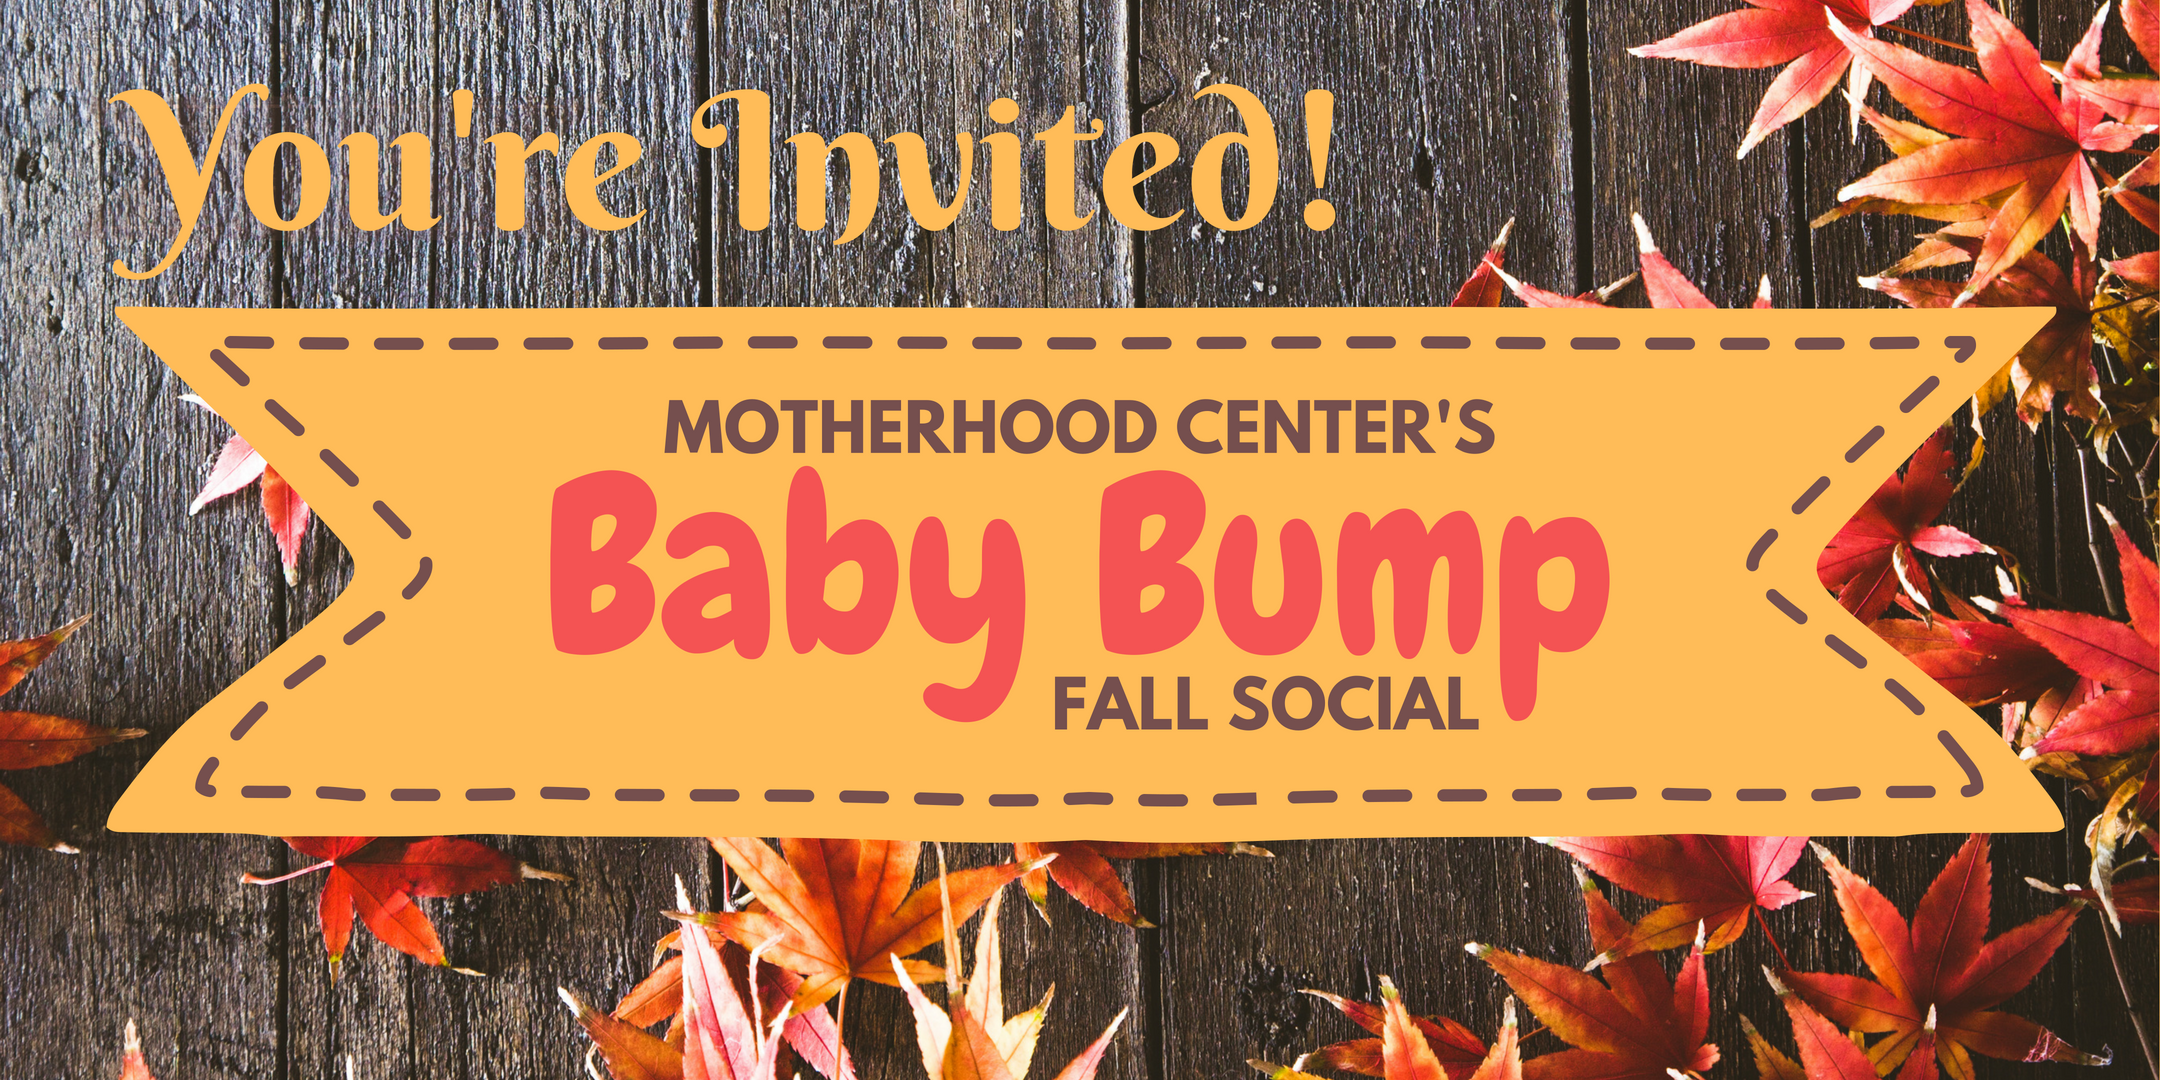 We’d love to see you at our Baby Bump Fall Social!